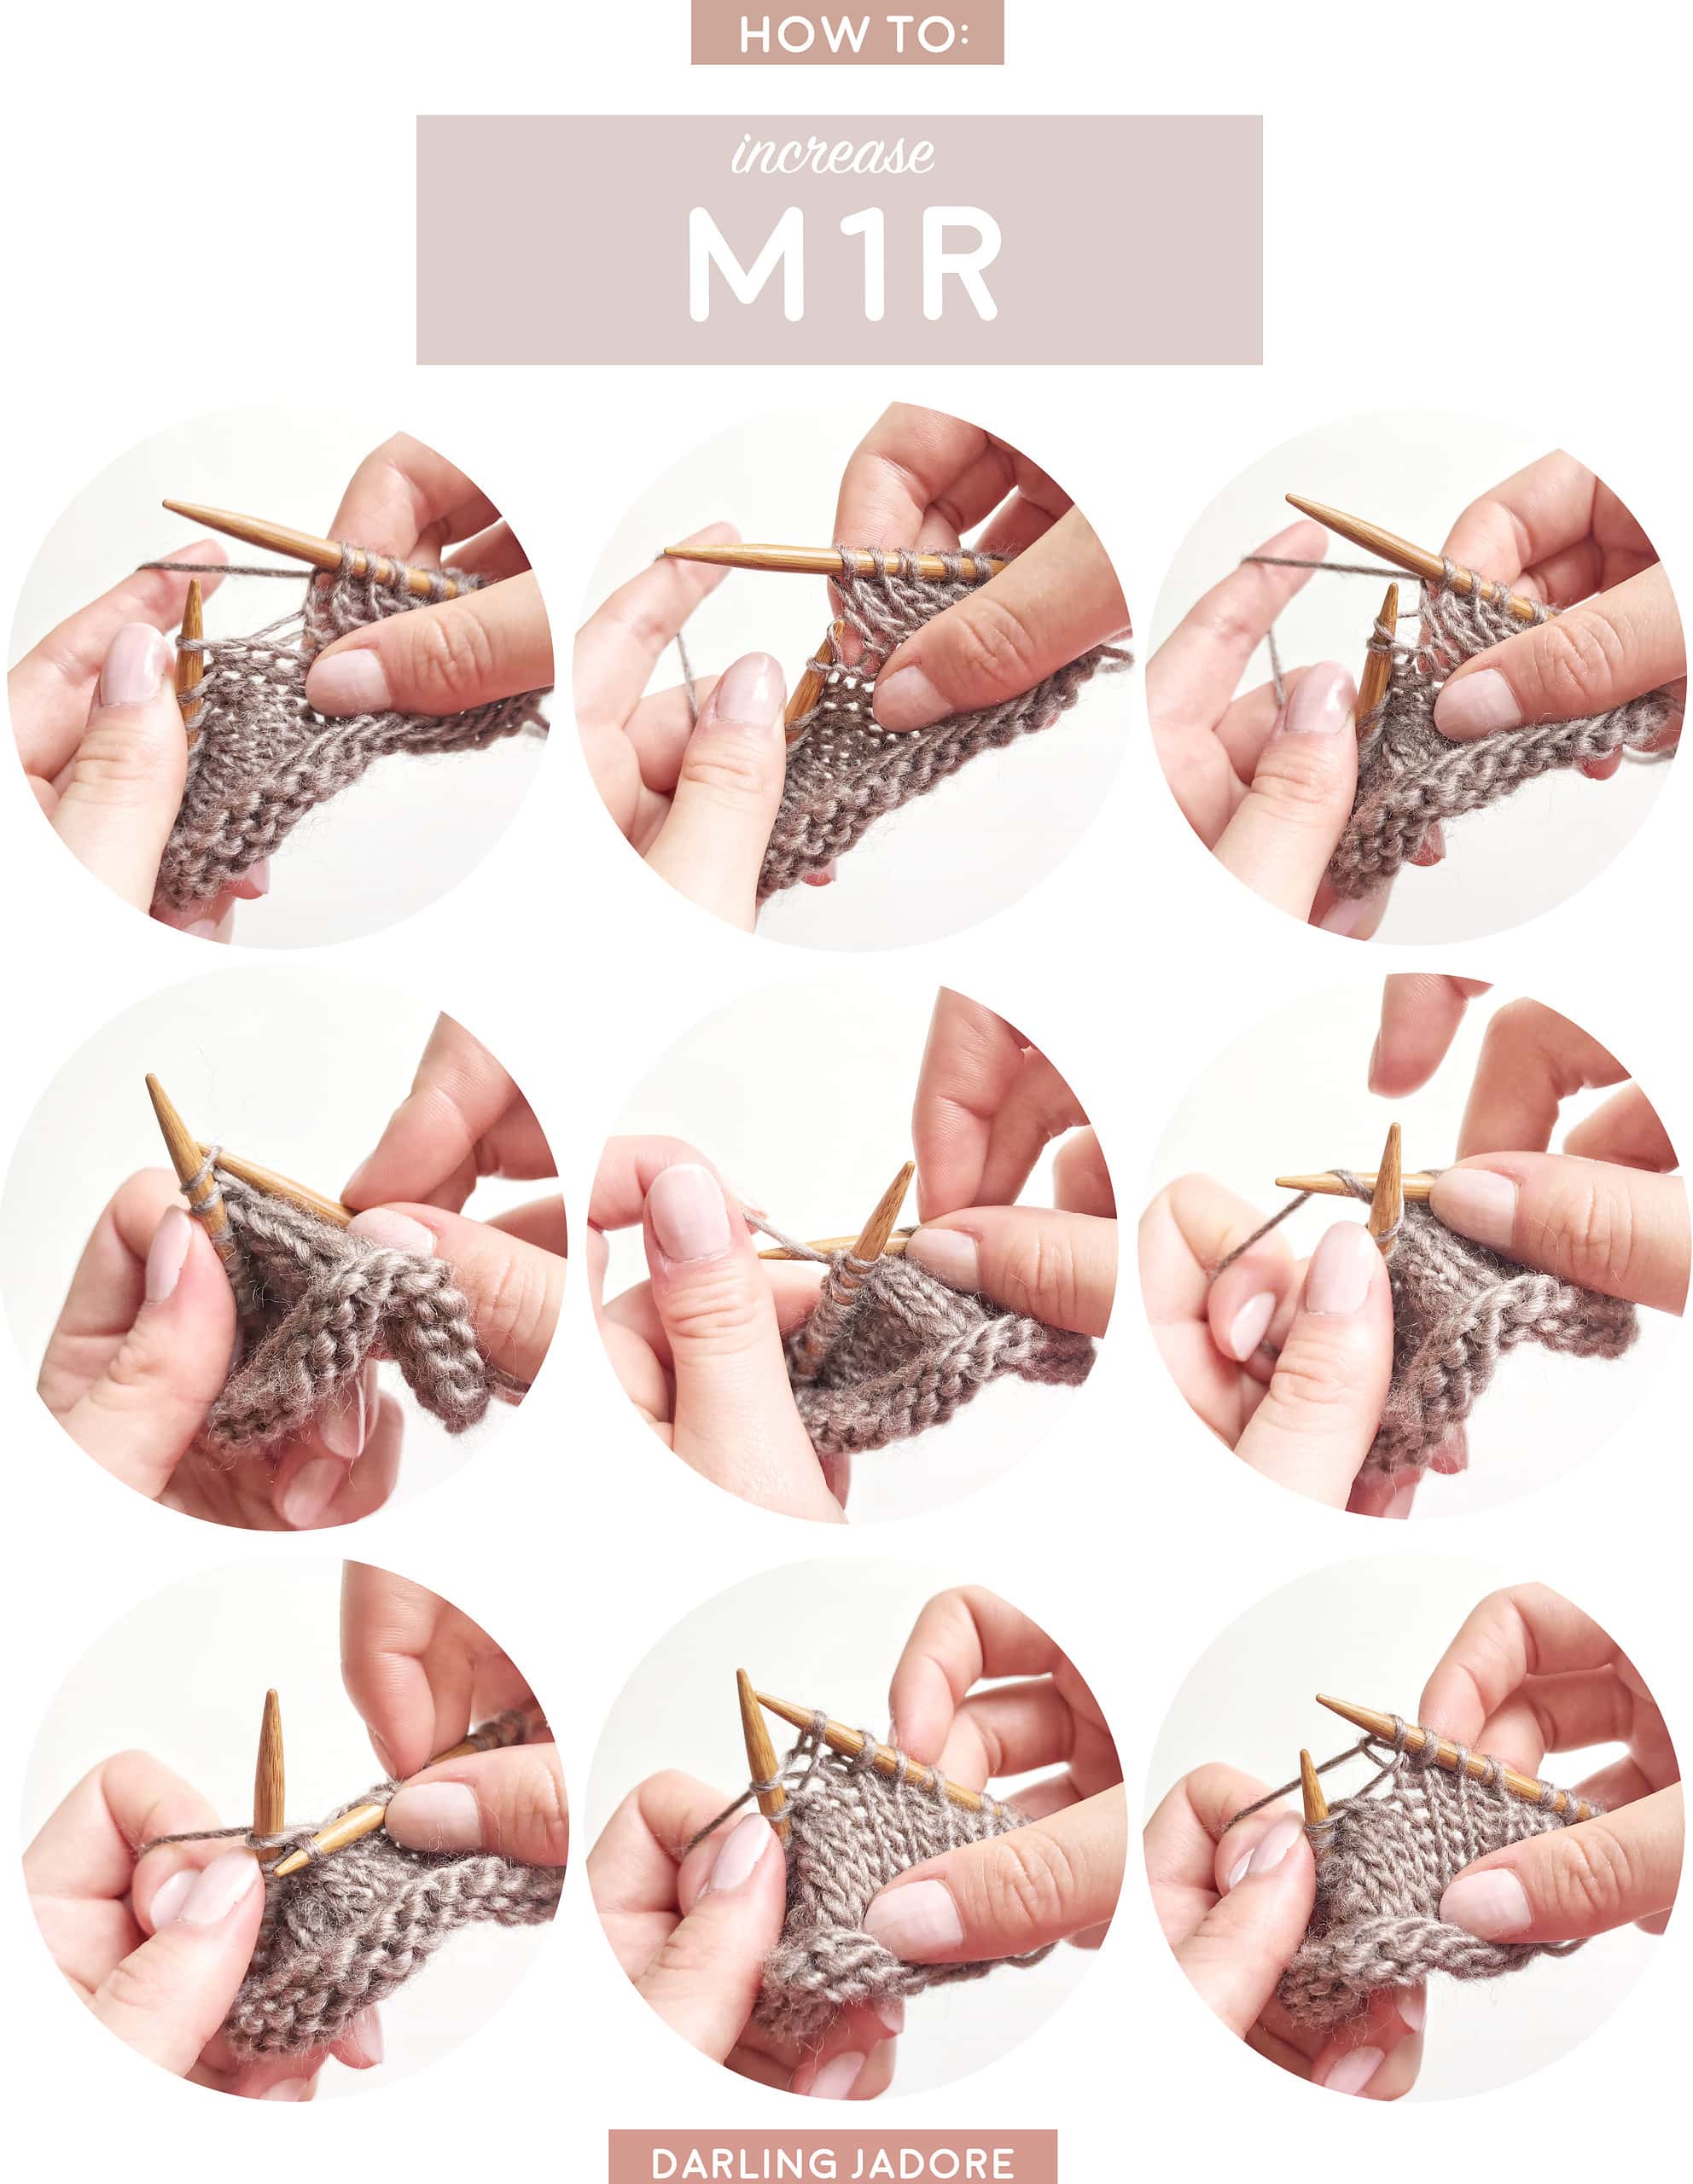 How to Block Your Knitting Projects (4+ Methods With Videos)